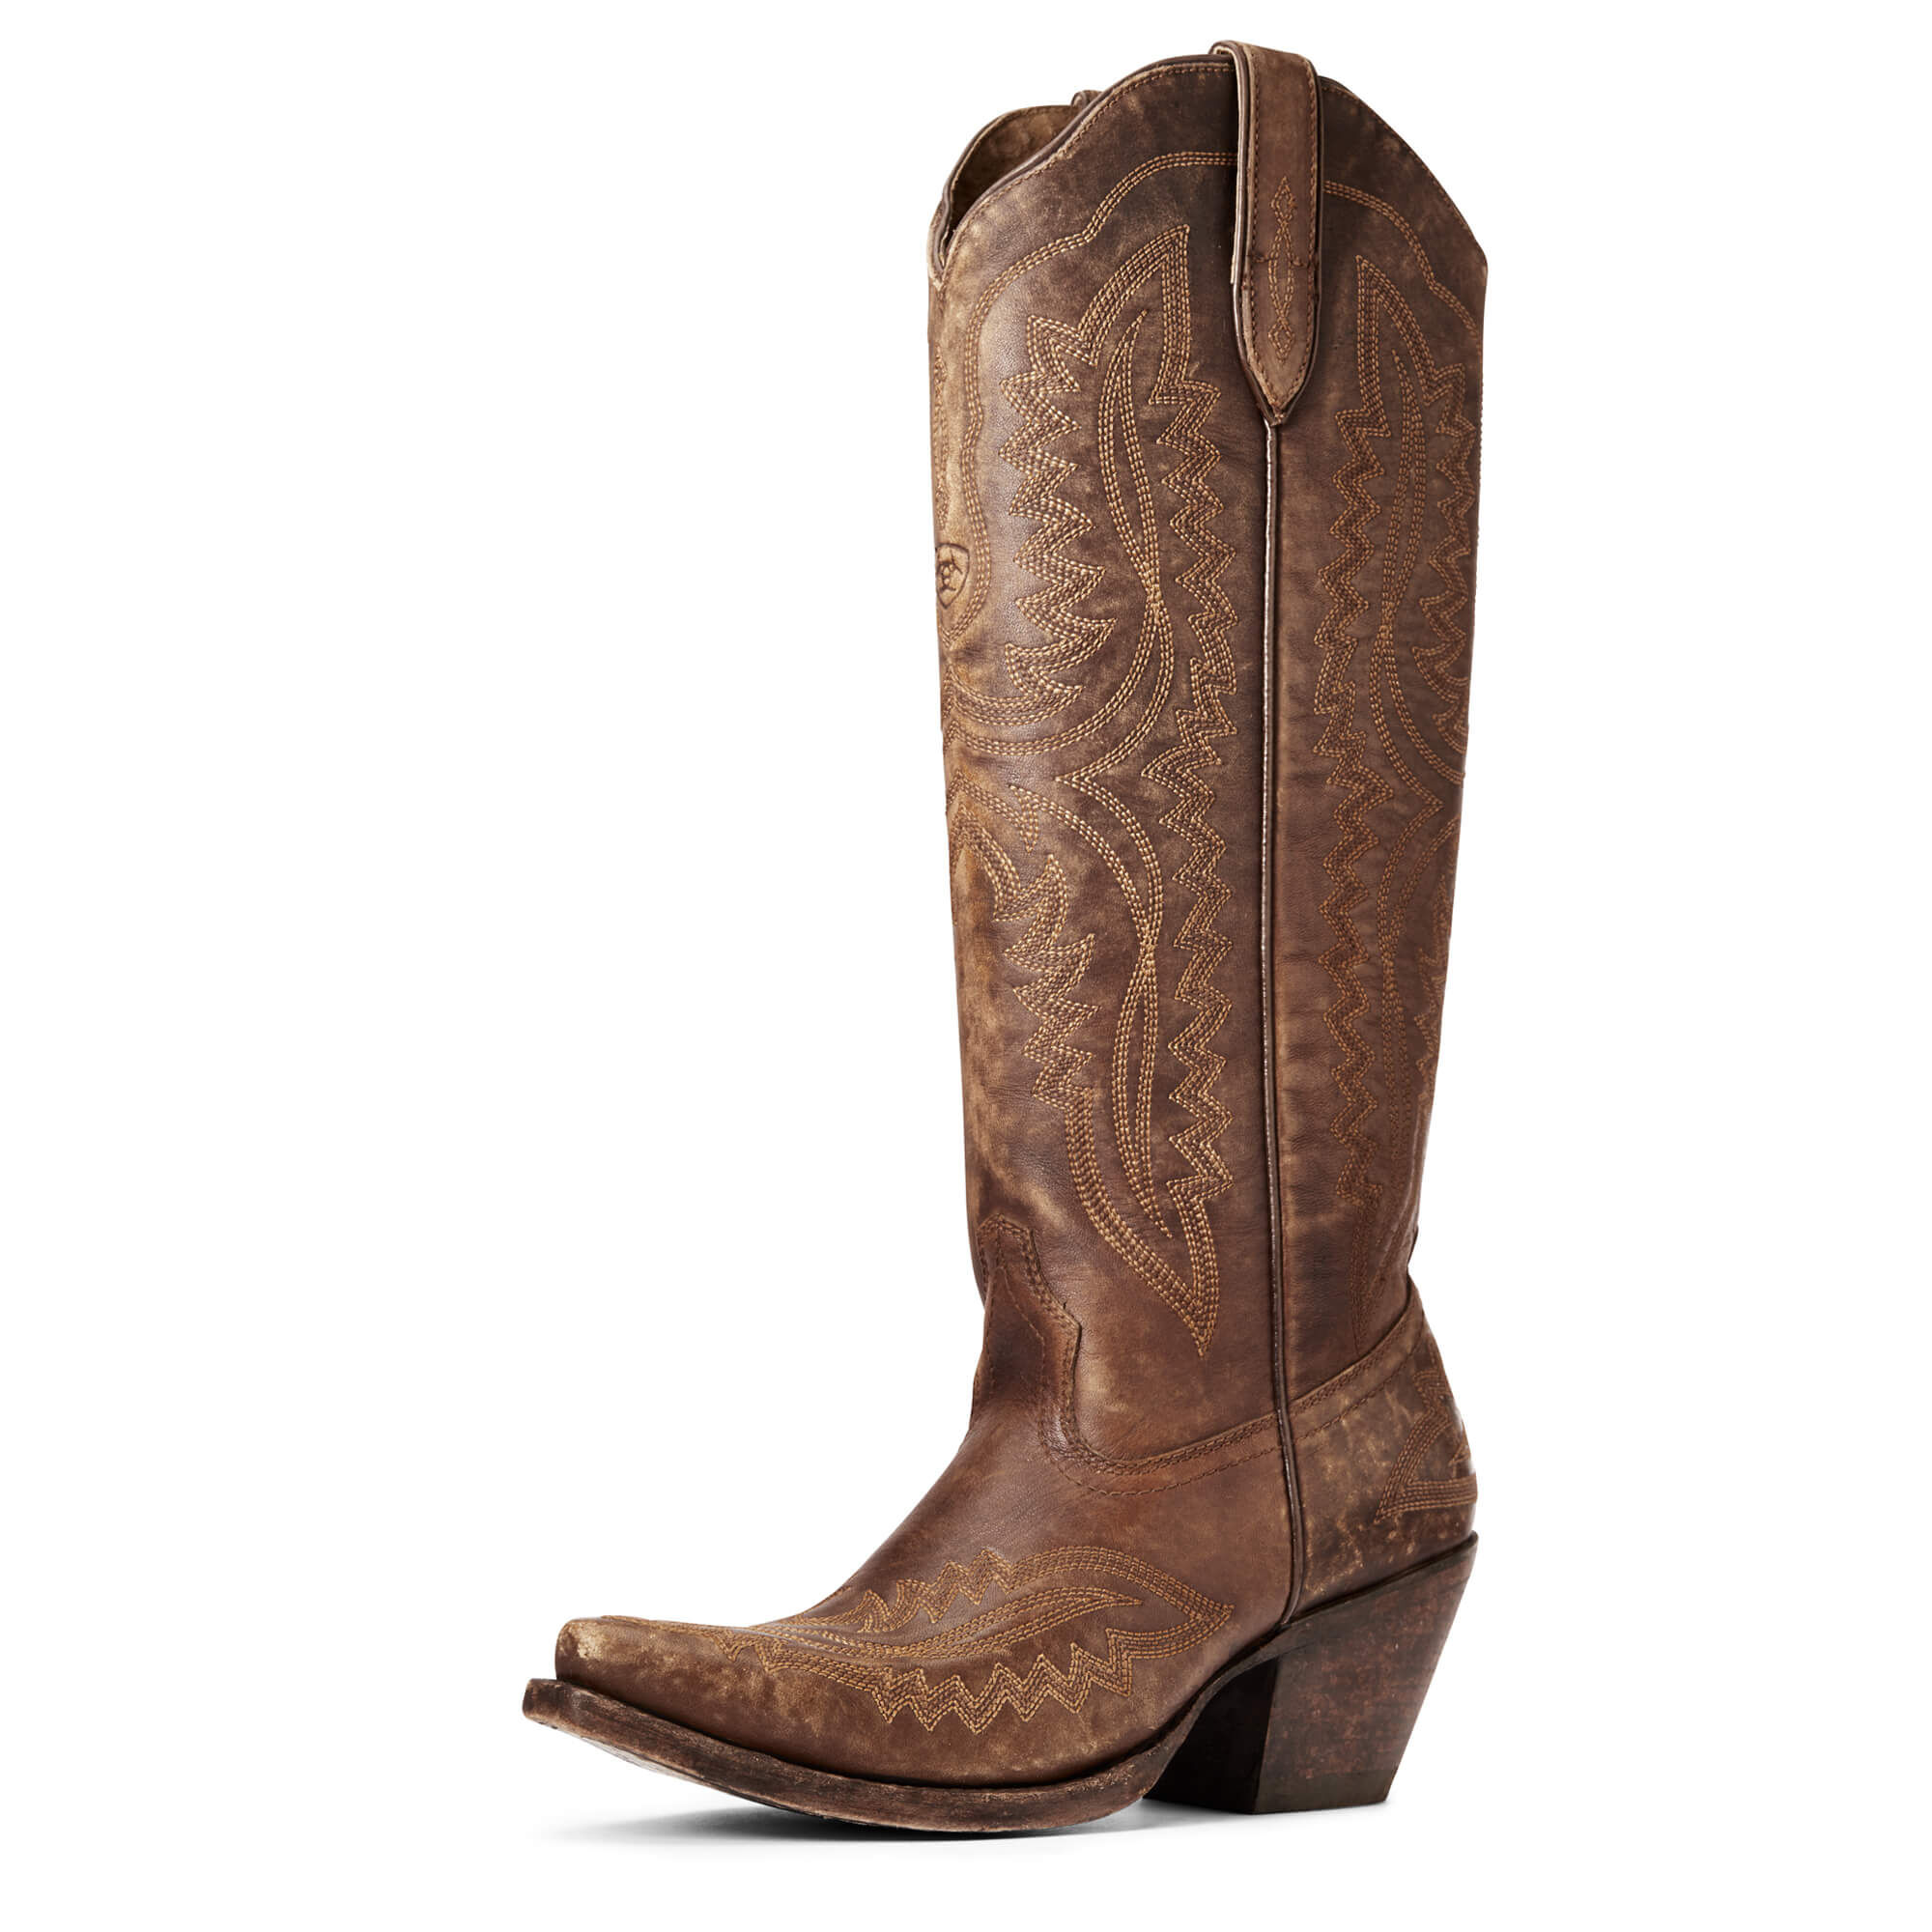 Women's Casanova Western Boots in Naturally Distressed Brown Leather  by Ariat